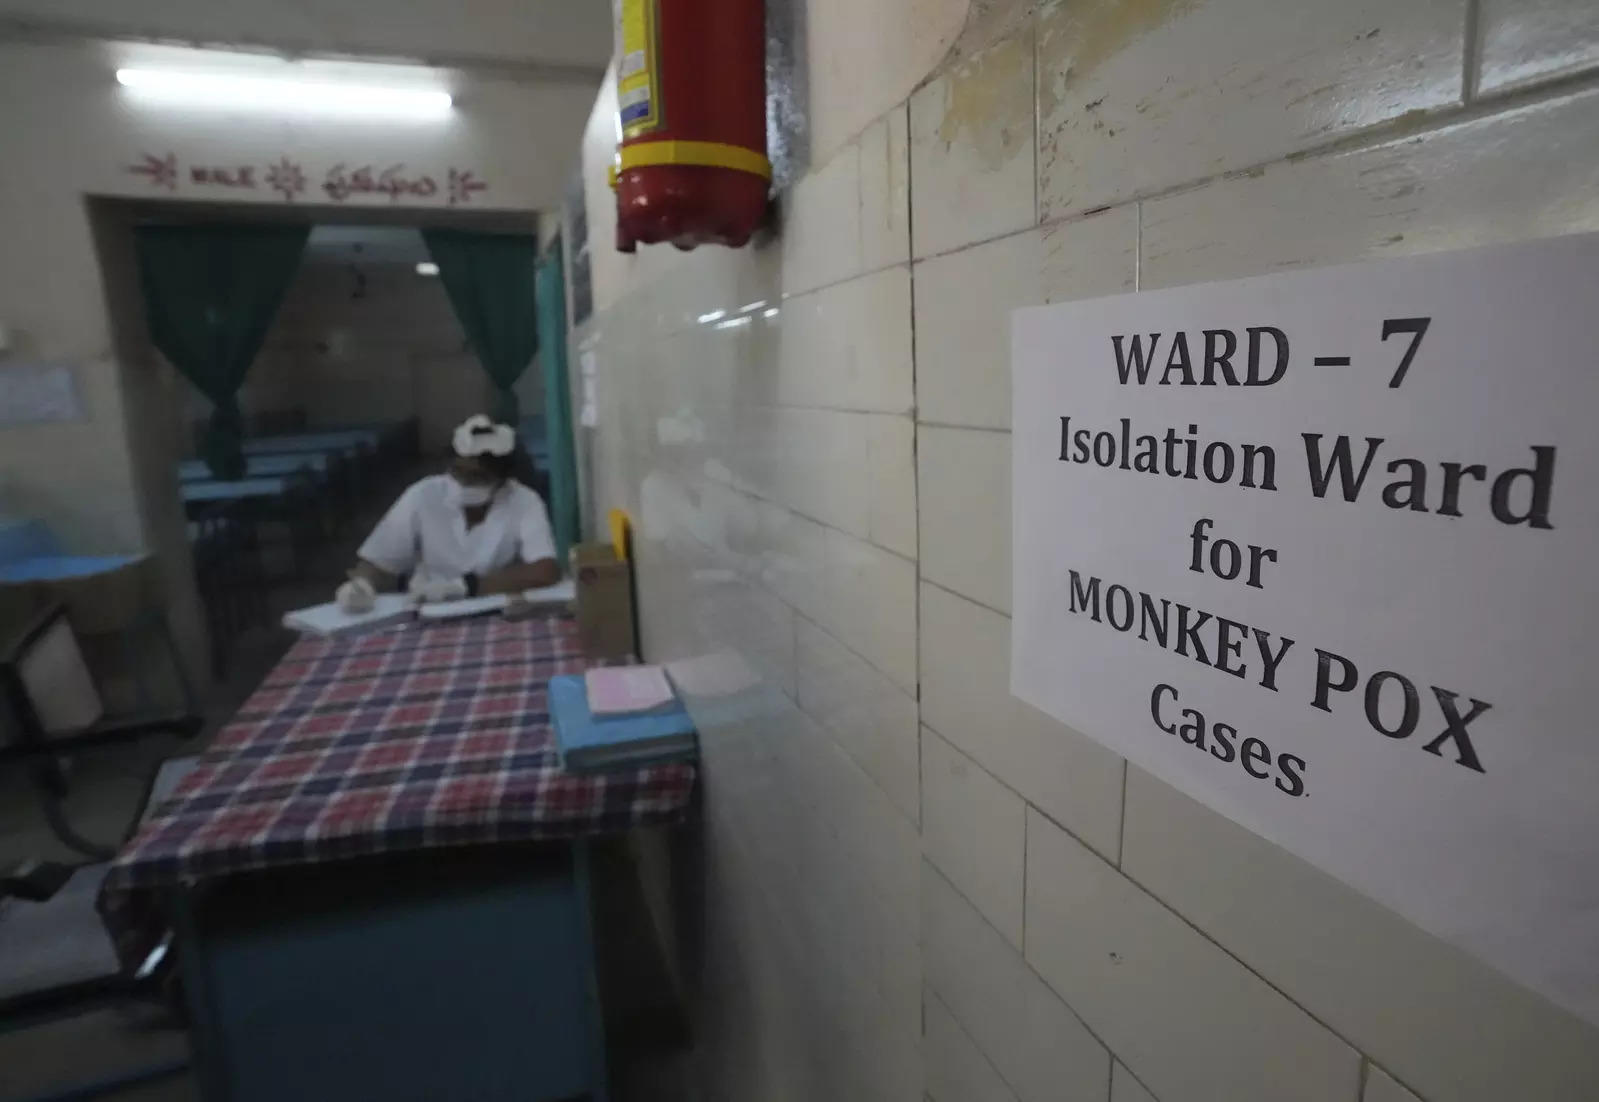 A health worker works at a monkeypox ward set up at a government hospital in Hyderabad